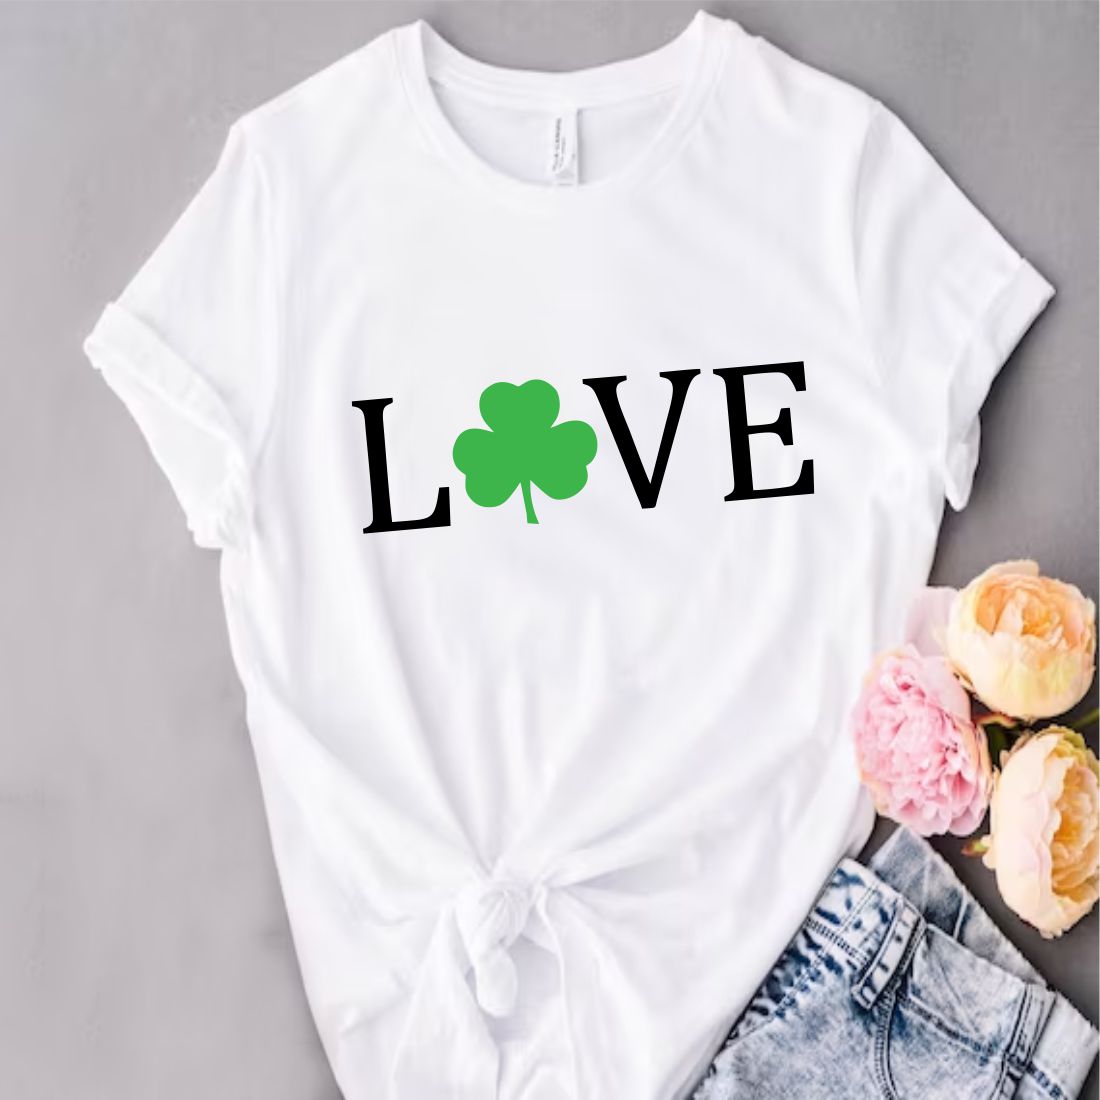 St Patrick's day Svg, St Patrick's Love , St Patrick's day Love Svg, St Patrick's day Png, St Patrick's Png, Love Svg, Instant Download Vector Cut file Cricut, Silhouette, Pdf Png, Dxf, Decal preview image.